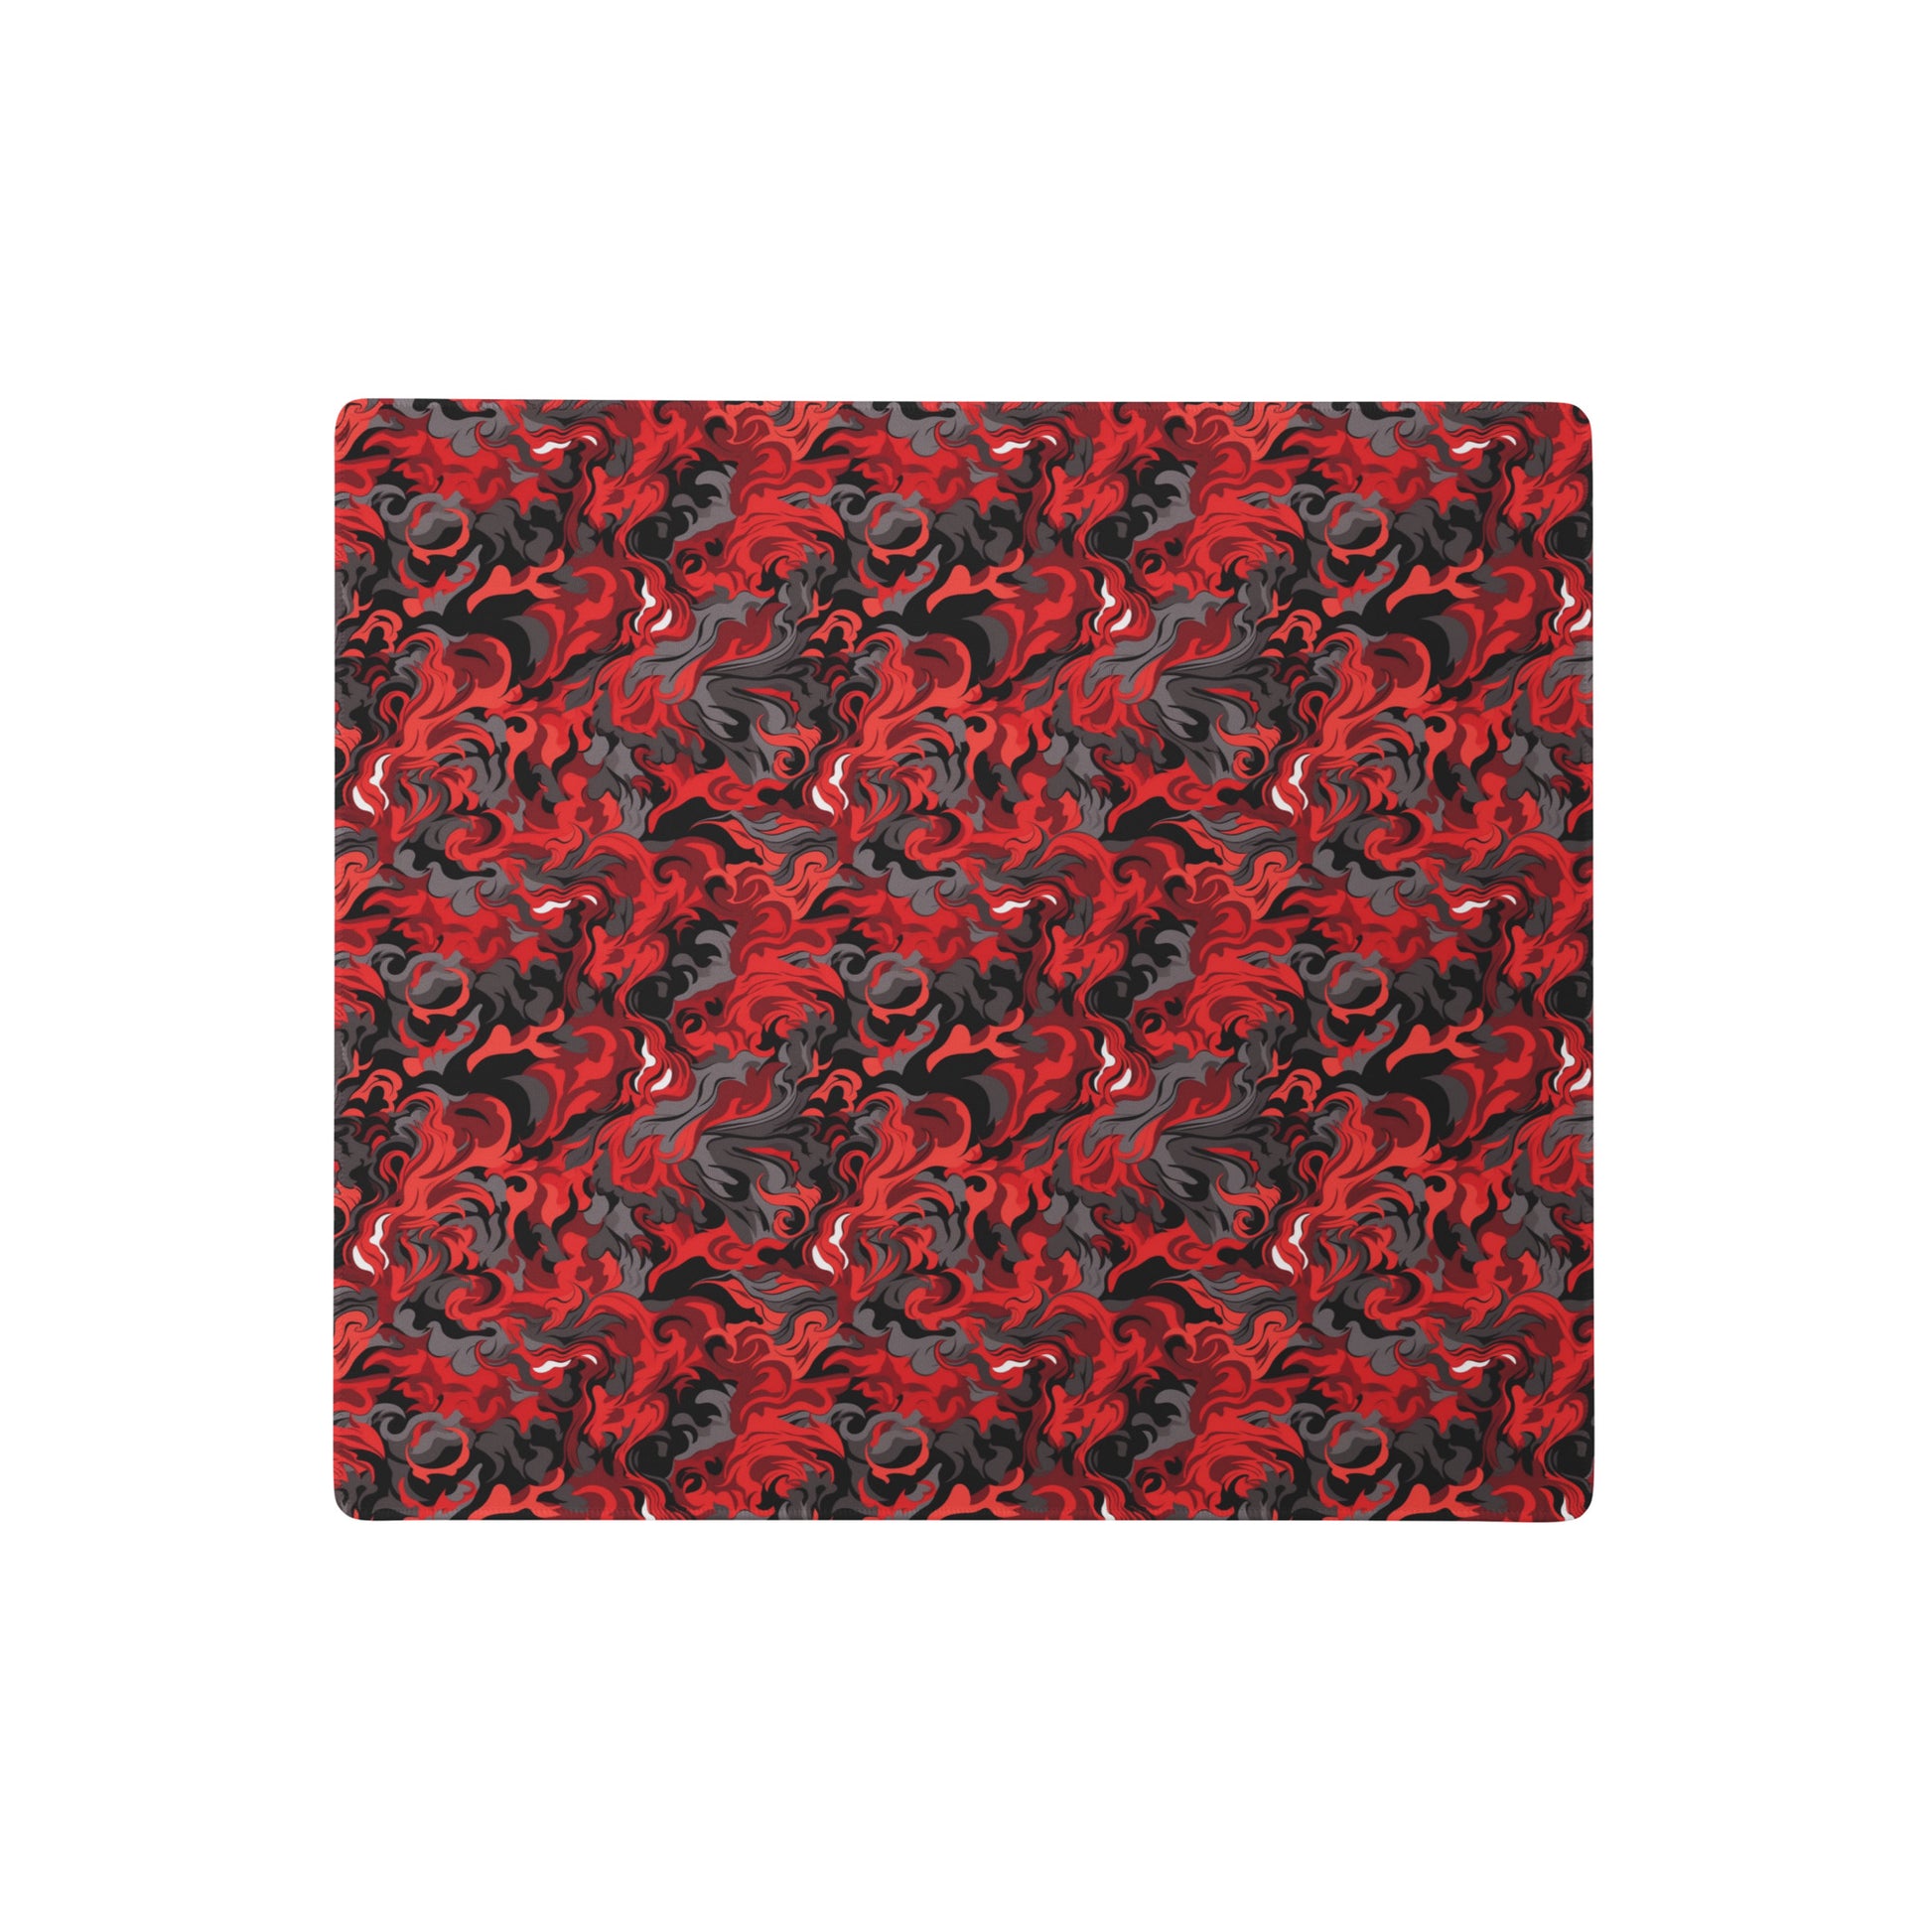 A 18" x 16" desk pad with a black and red camo pattern.